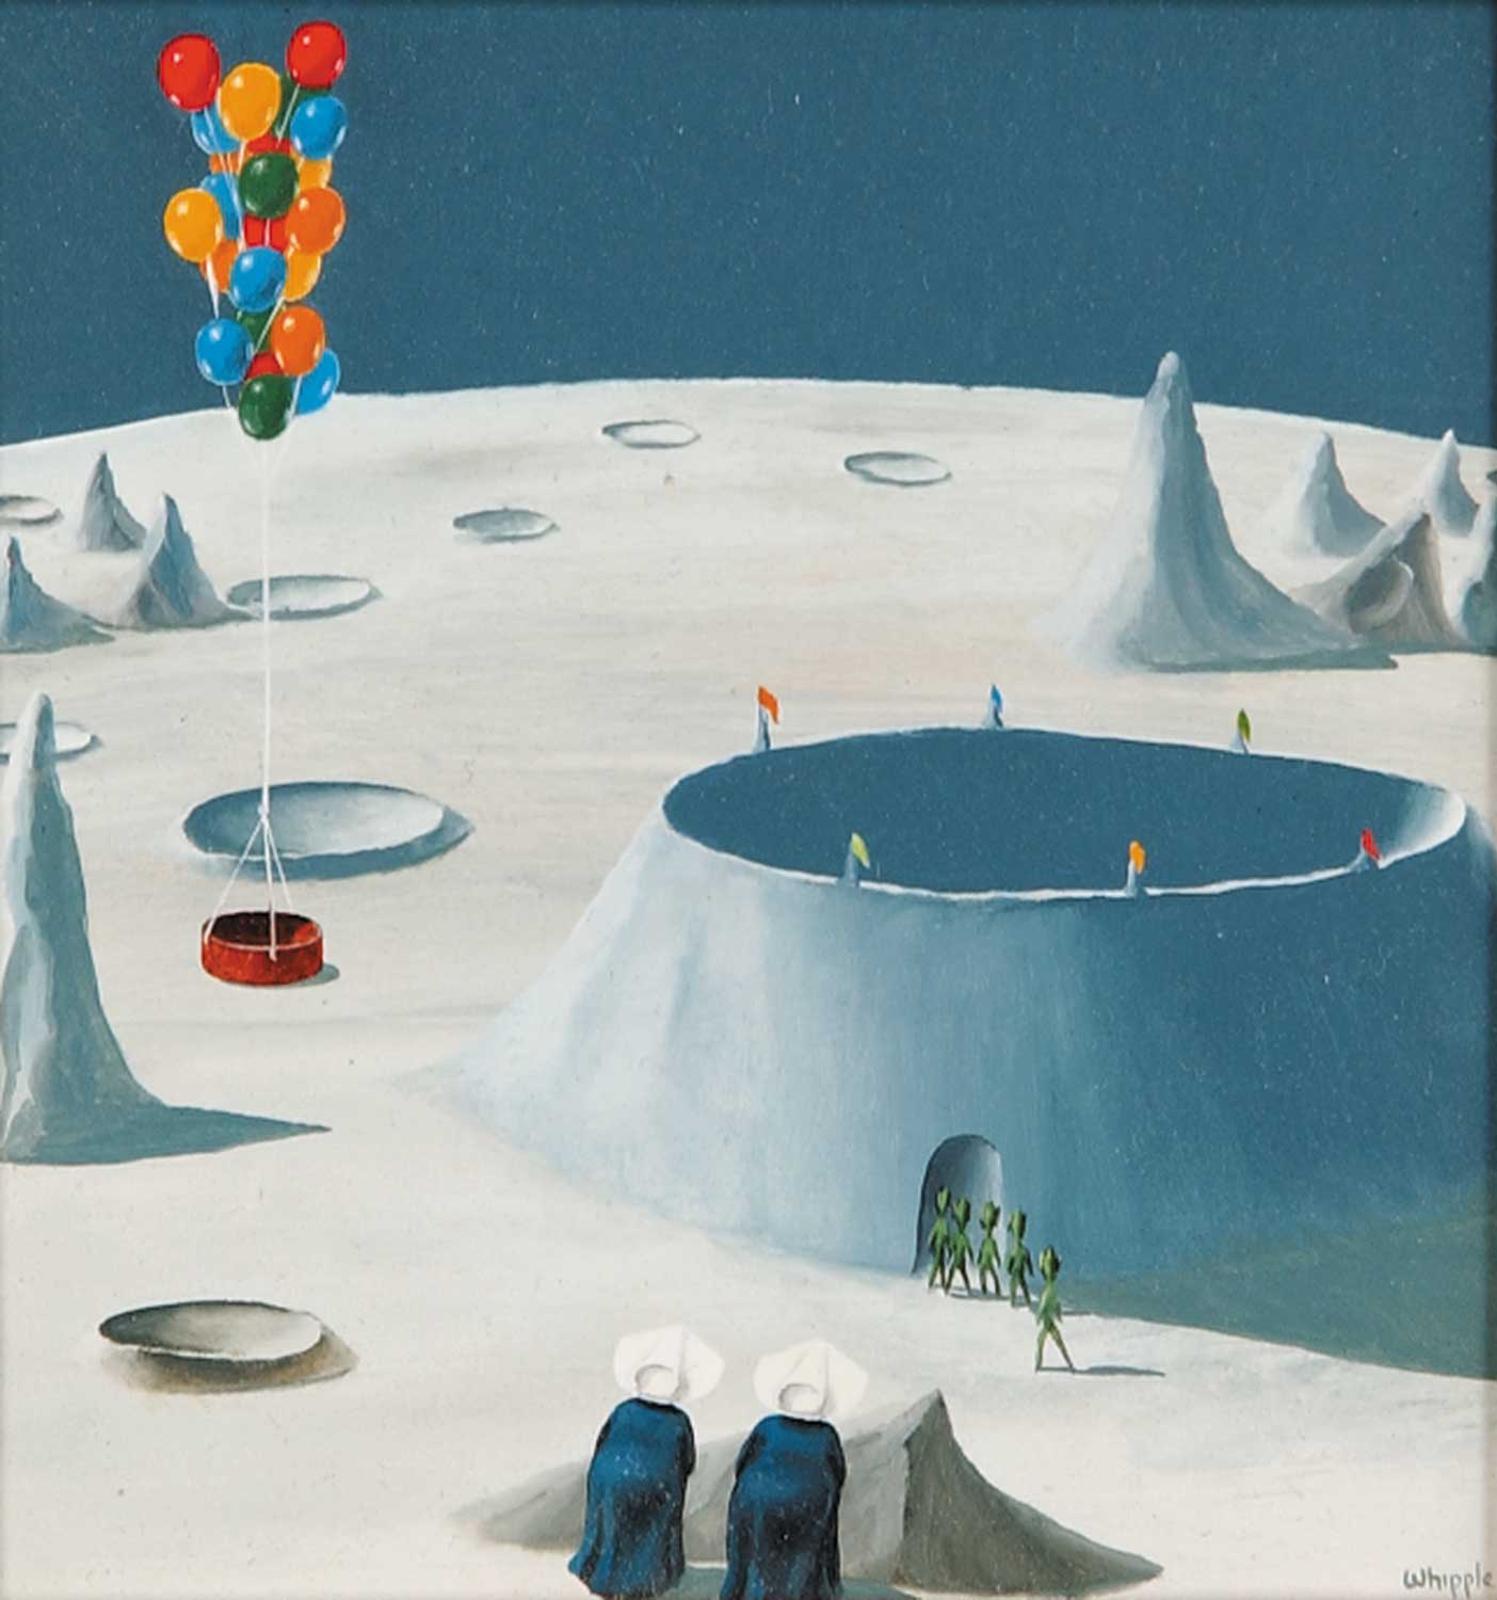 Frank Whipple - Untitled - Aliens, Moons, Balloons and Nuns